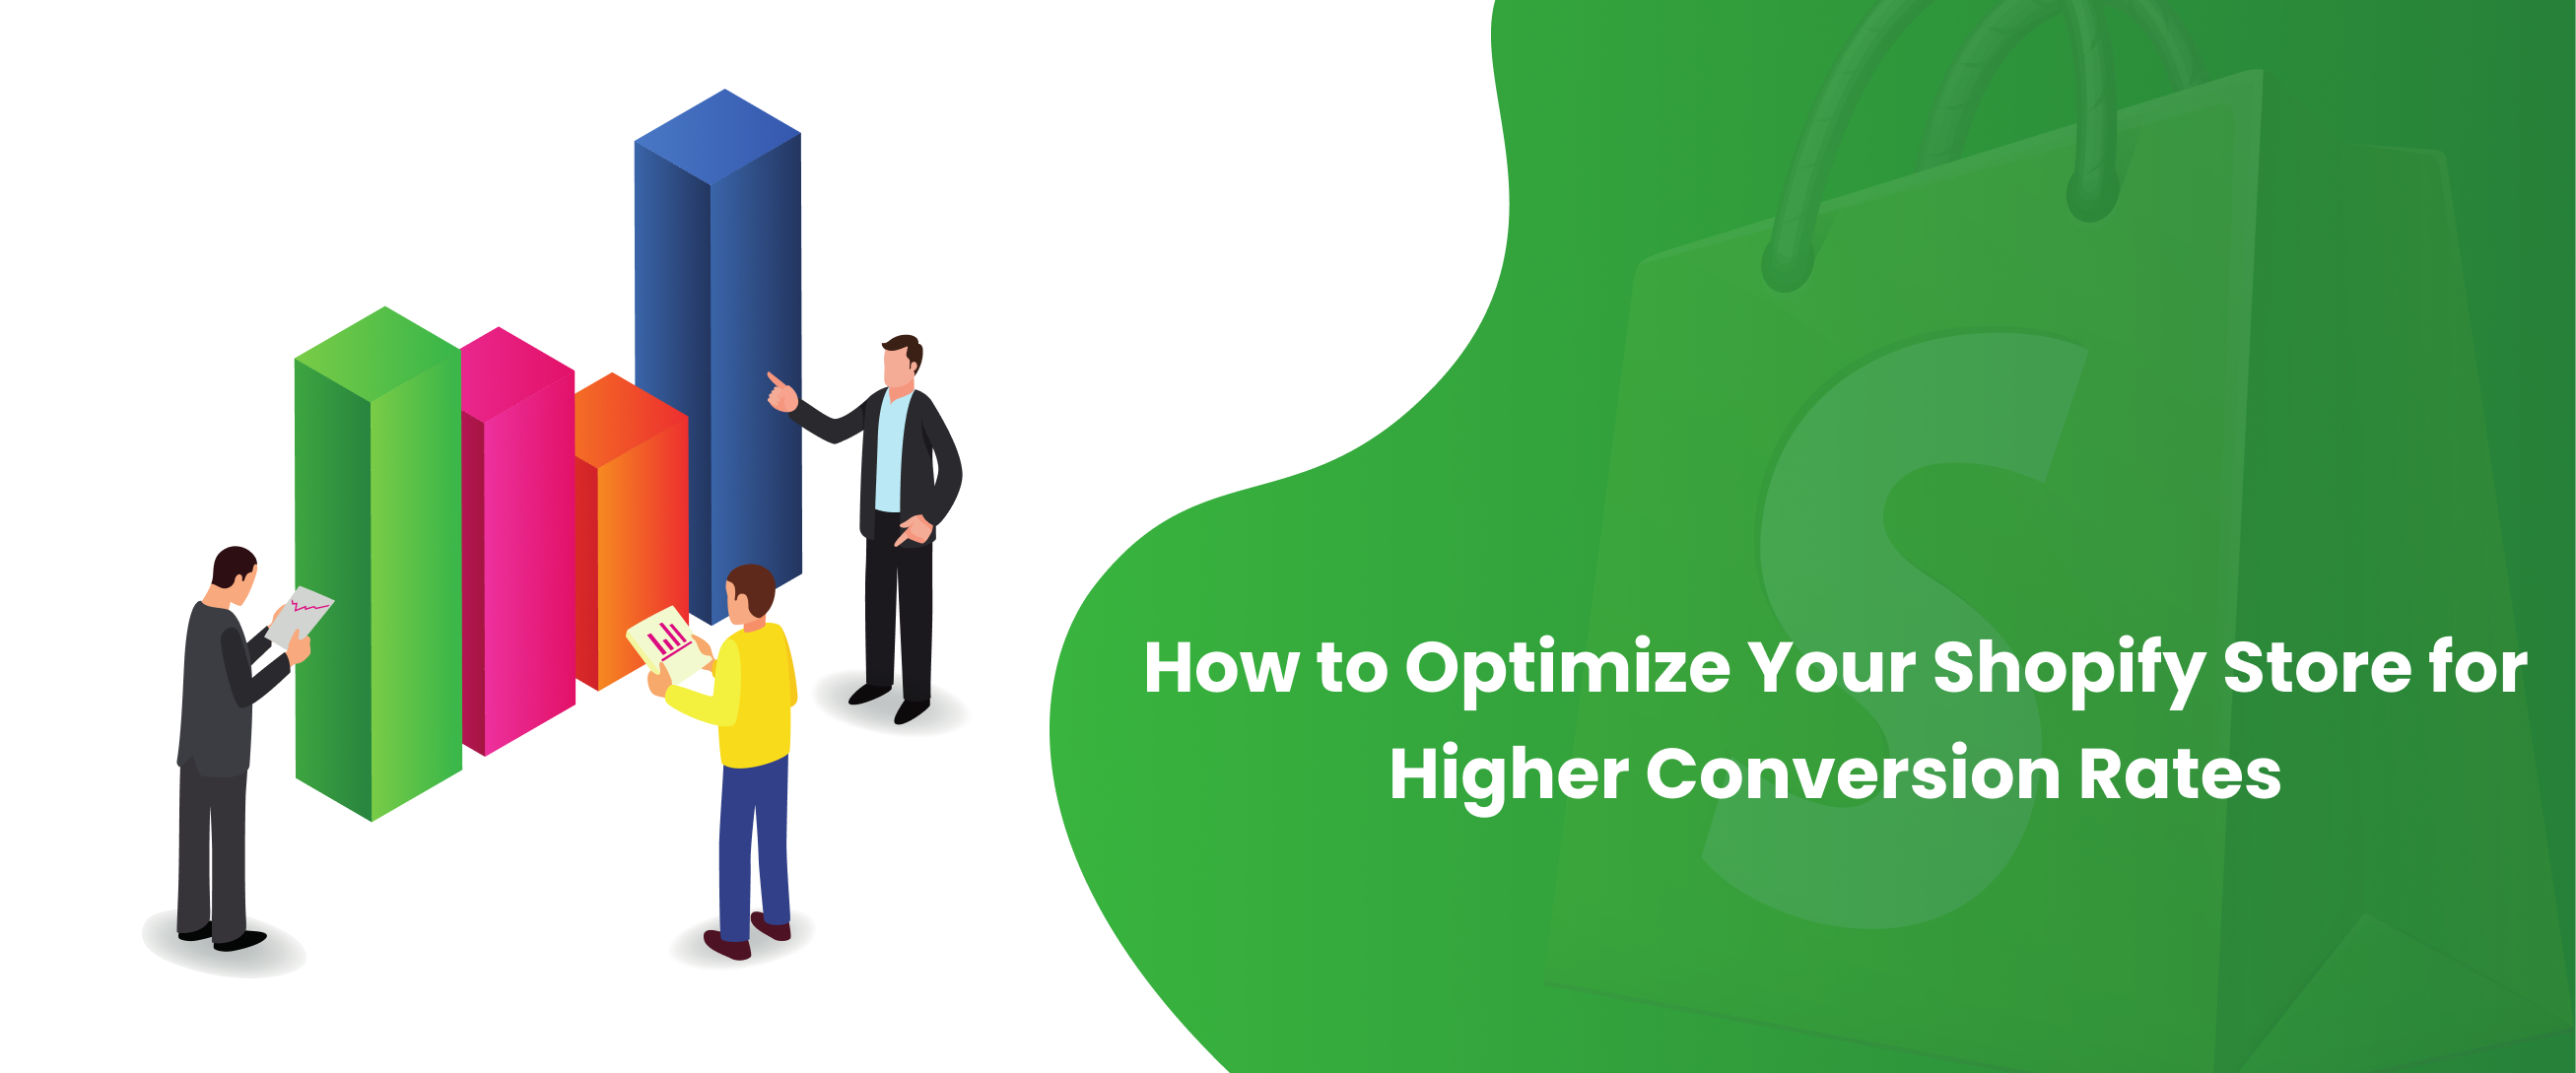 How to Optimize Your Shopify Store for Higher Conversion Rates